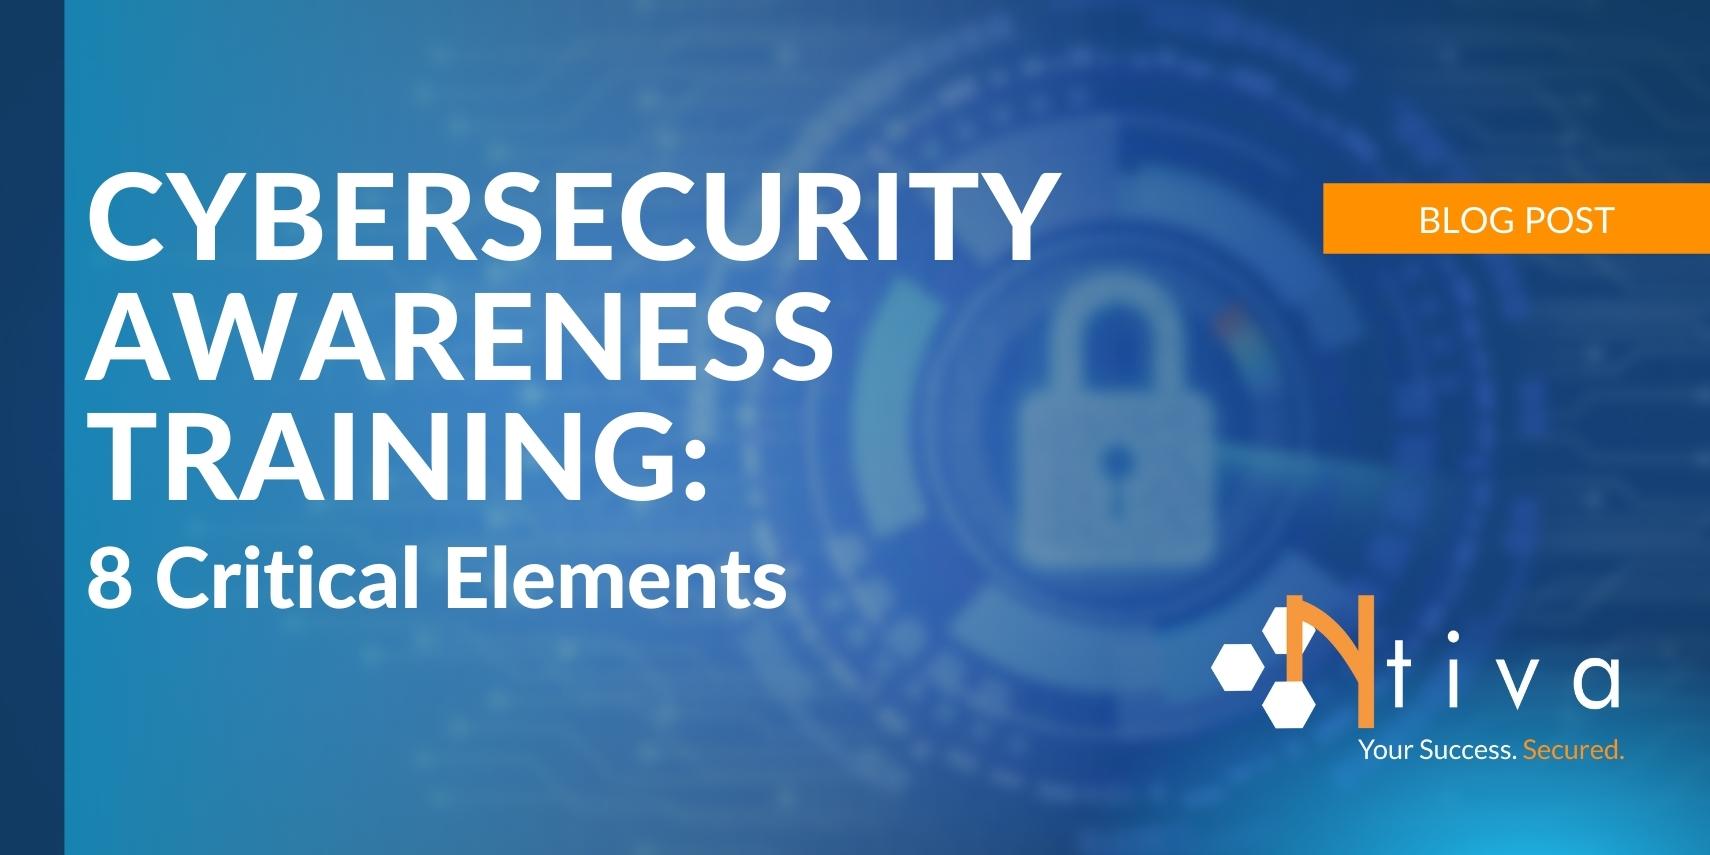 Cybersecurity Awareness Training: 8 Tips To Get Started!